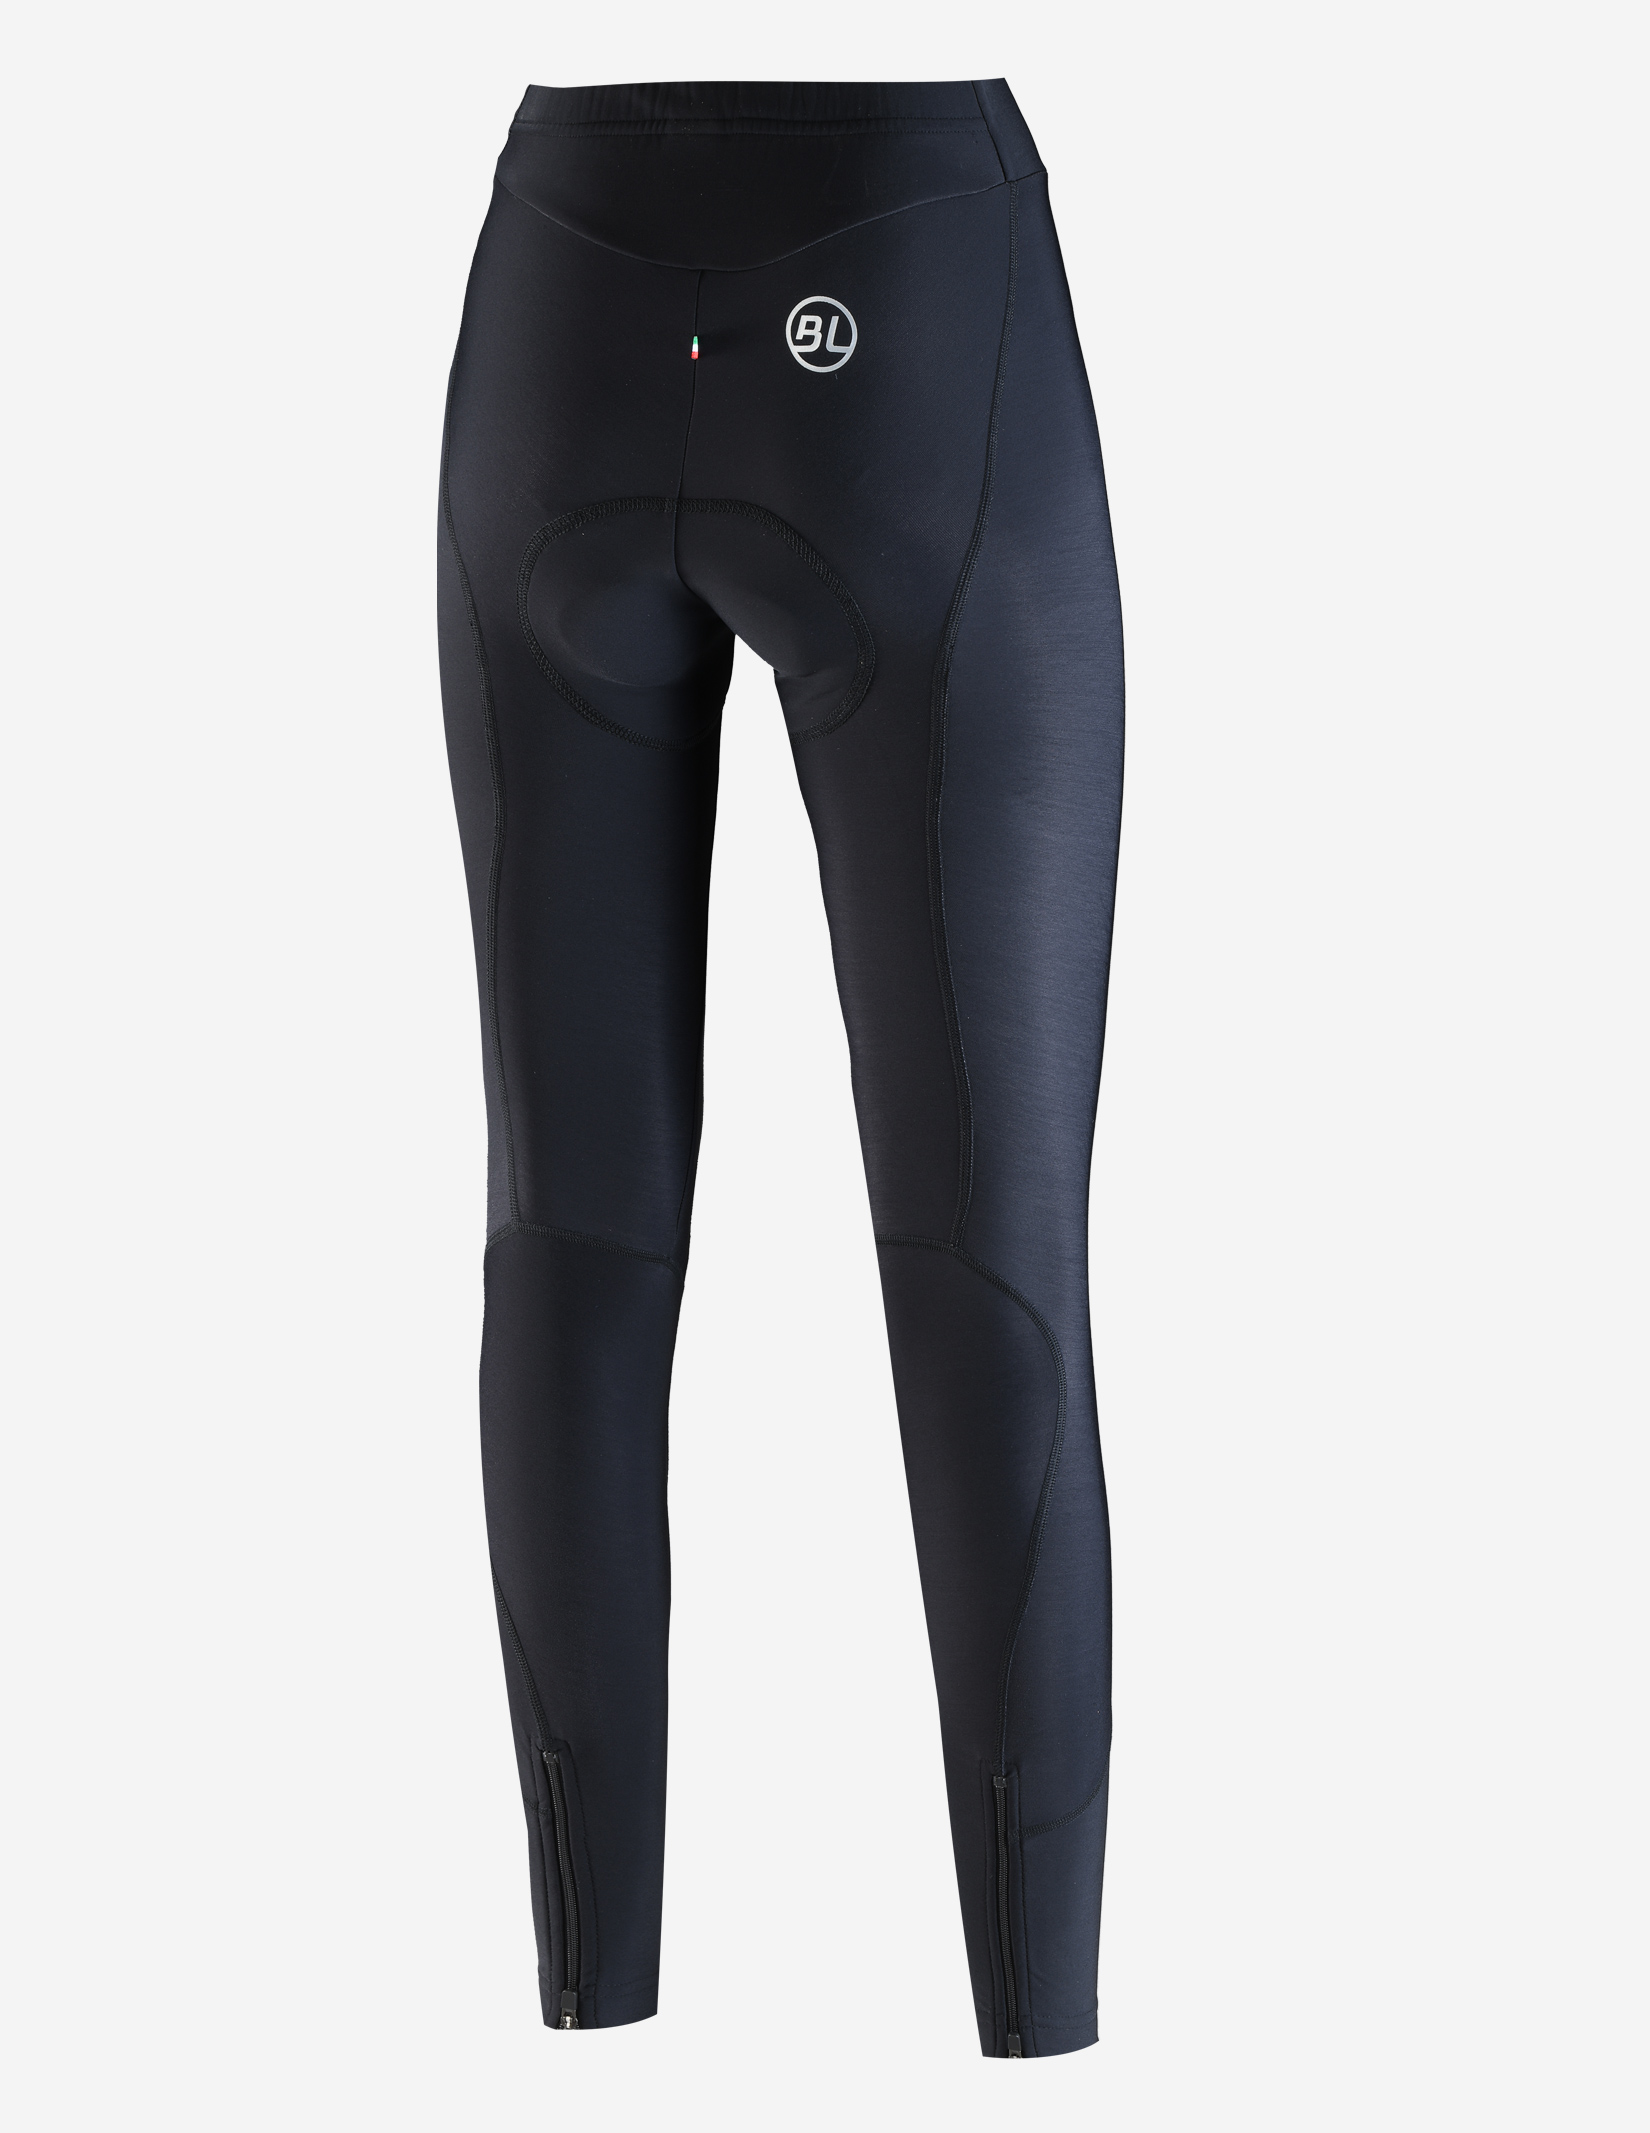 Women's water repellent winter cycling tights ARMONIA